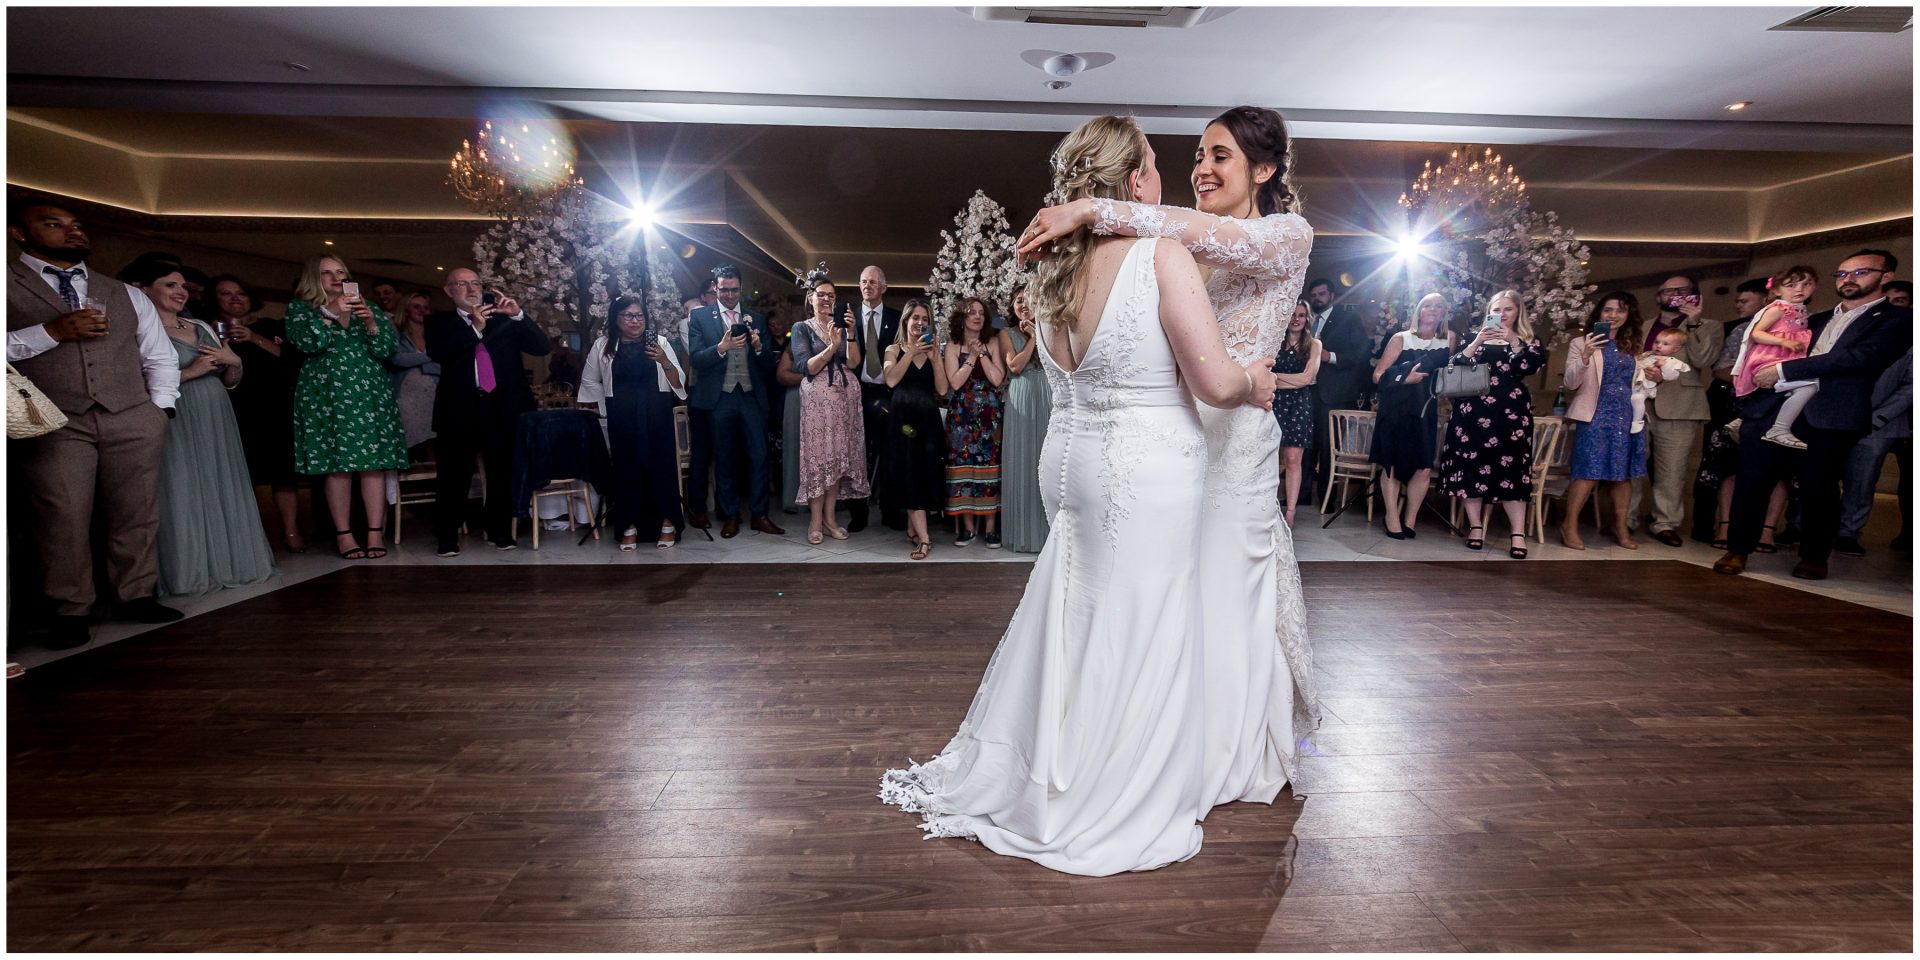 Same sex wedding in Hampshire first dance